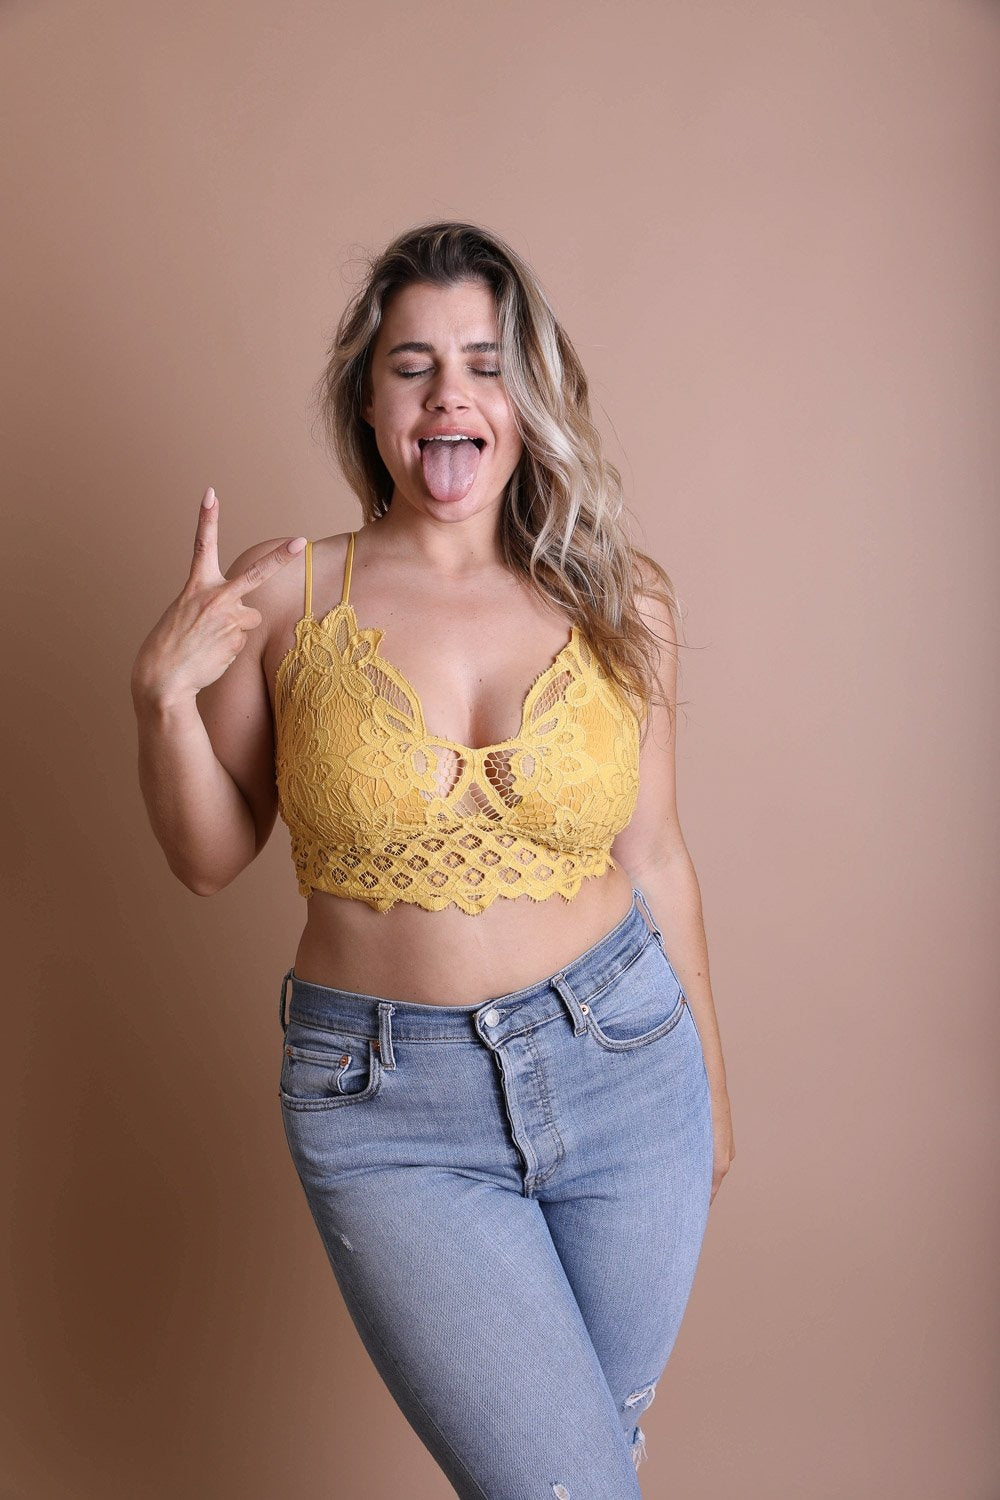 Leto Collection - Crochet Overlay Longline Bralette $32 – Thank you